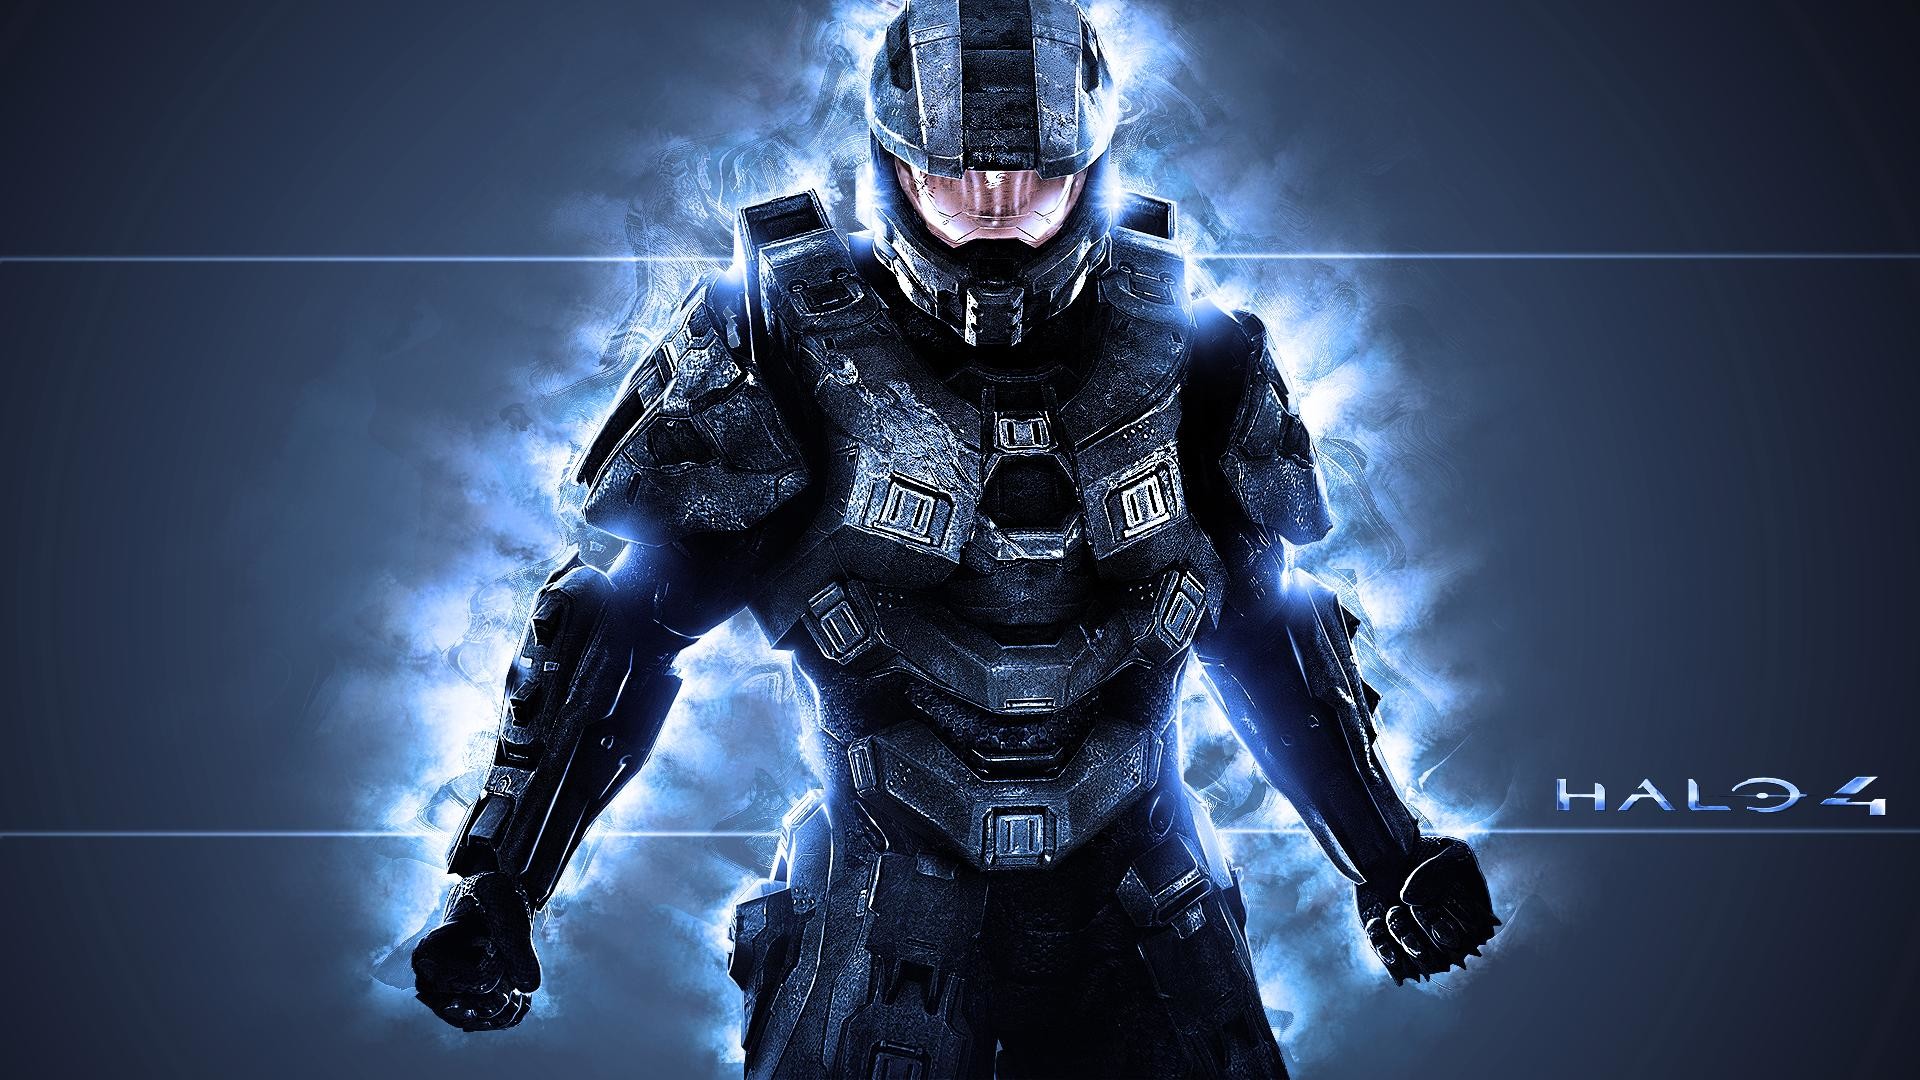 1920x1080 Halo 4 Wallpapers HD (51 Wallpapers)